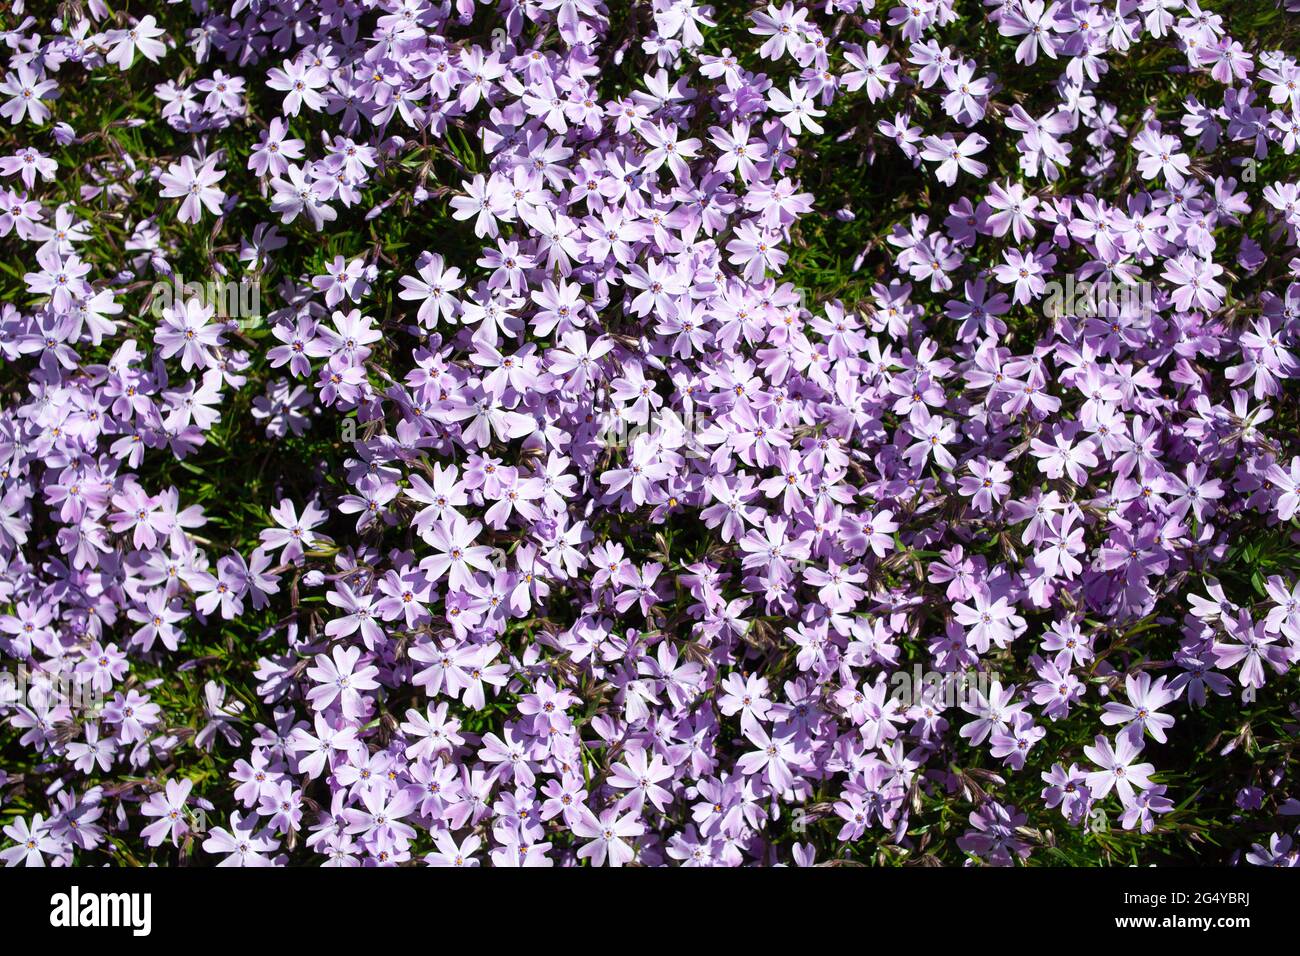 Creeping phlox background. Phlox subulata with pink striped petals around a small patch of similar but solid pink phlox. Botanical garden. Stock Photo